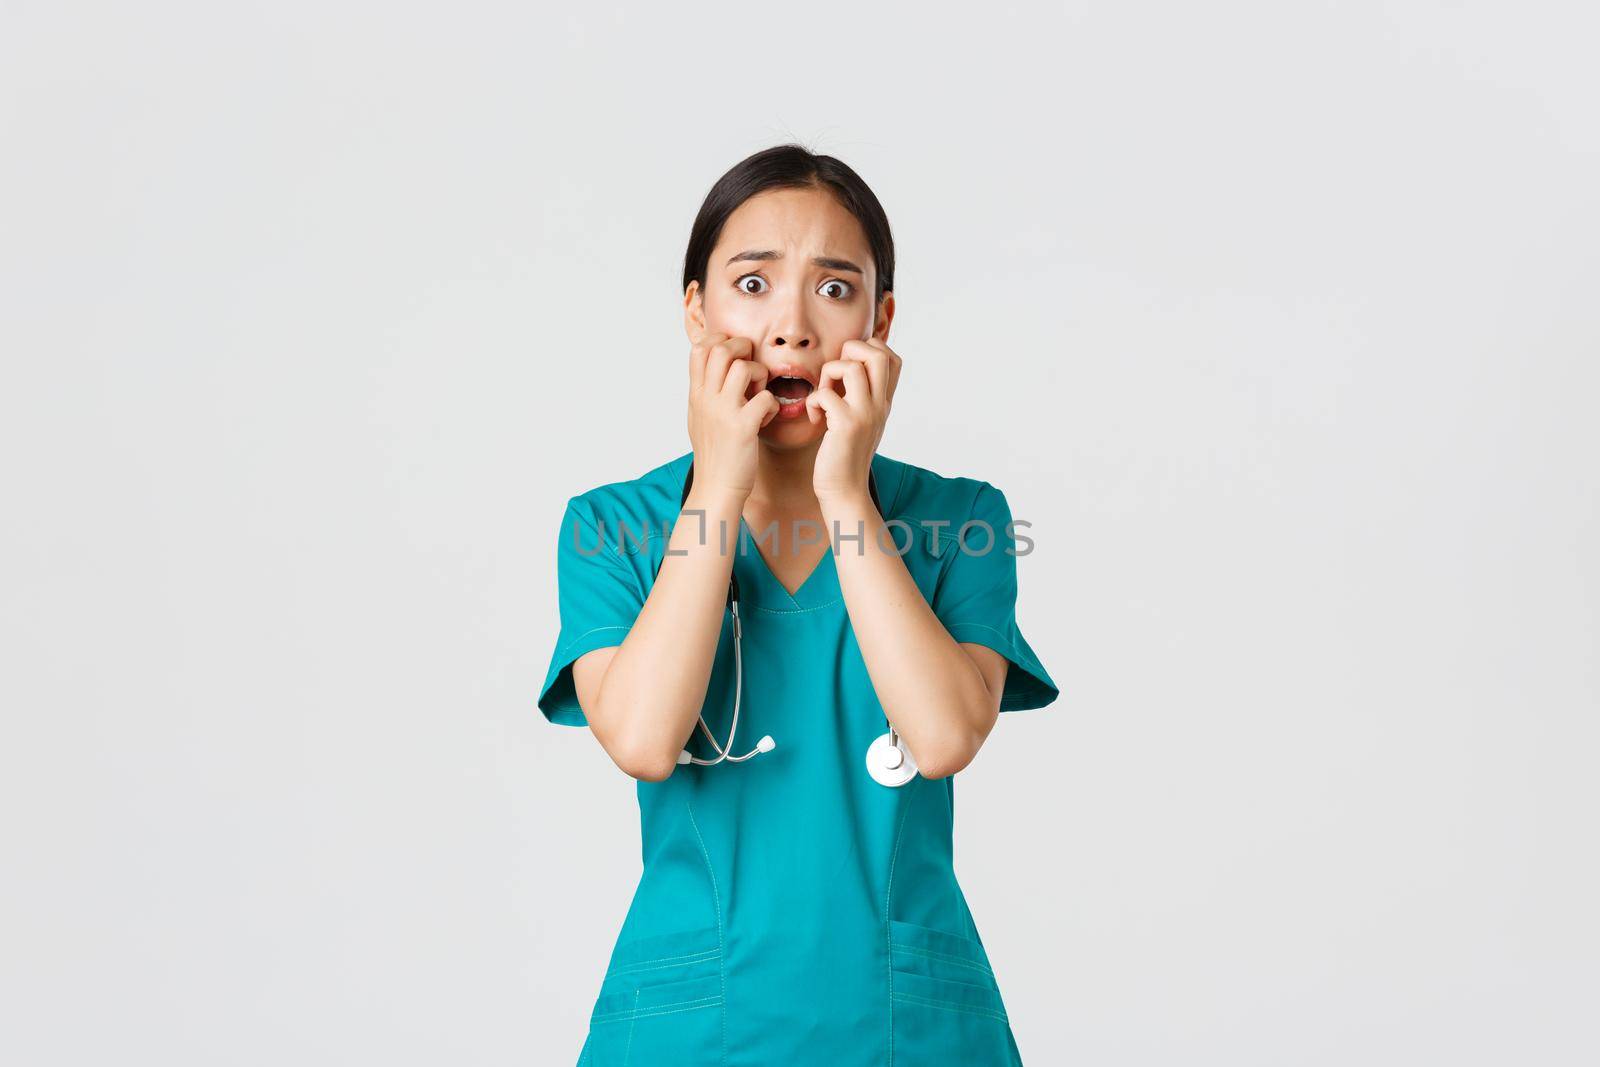 Covid-19, healthcare workers and preventing virus concept. Scared insecure asian female doctor, nurse in scrubs starts to panic from fear, biting fingernails and looking horrified, white background.